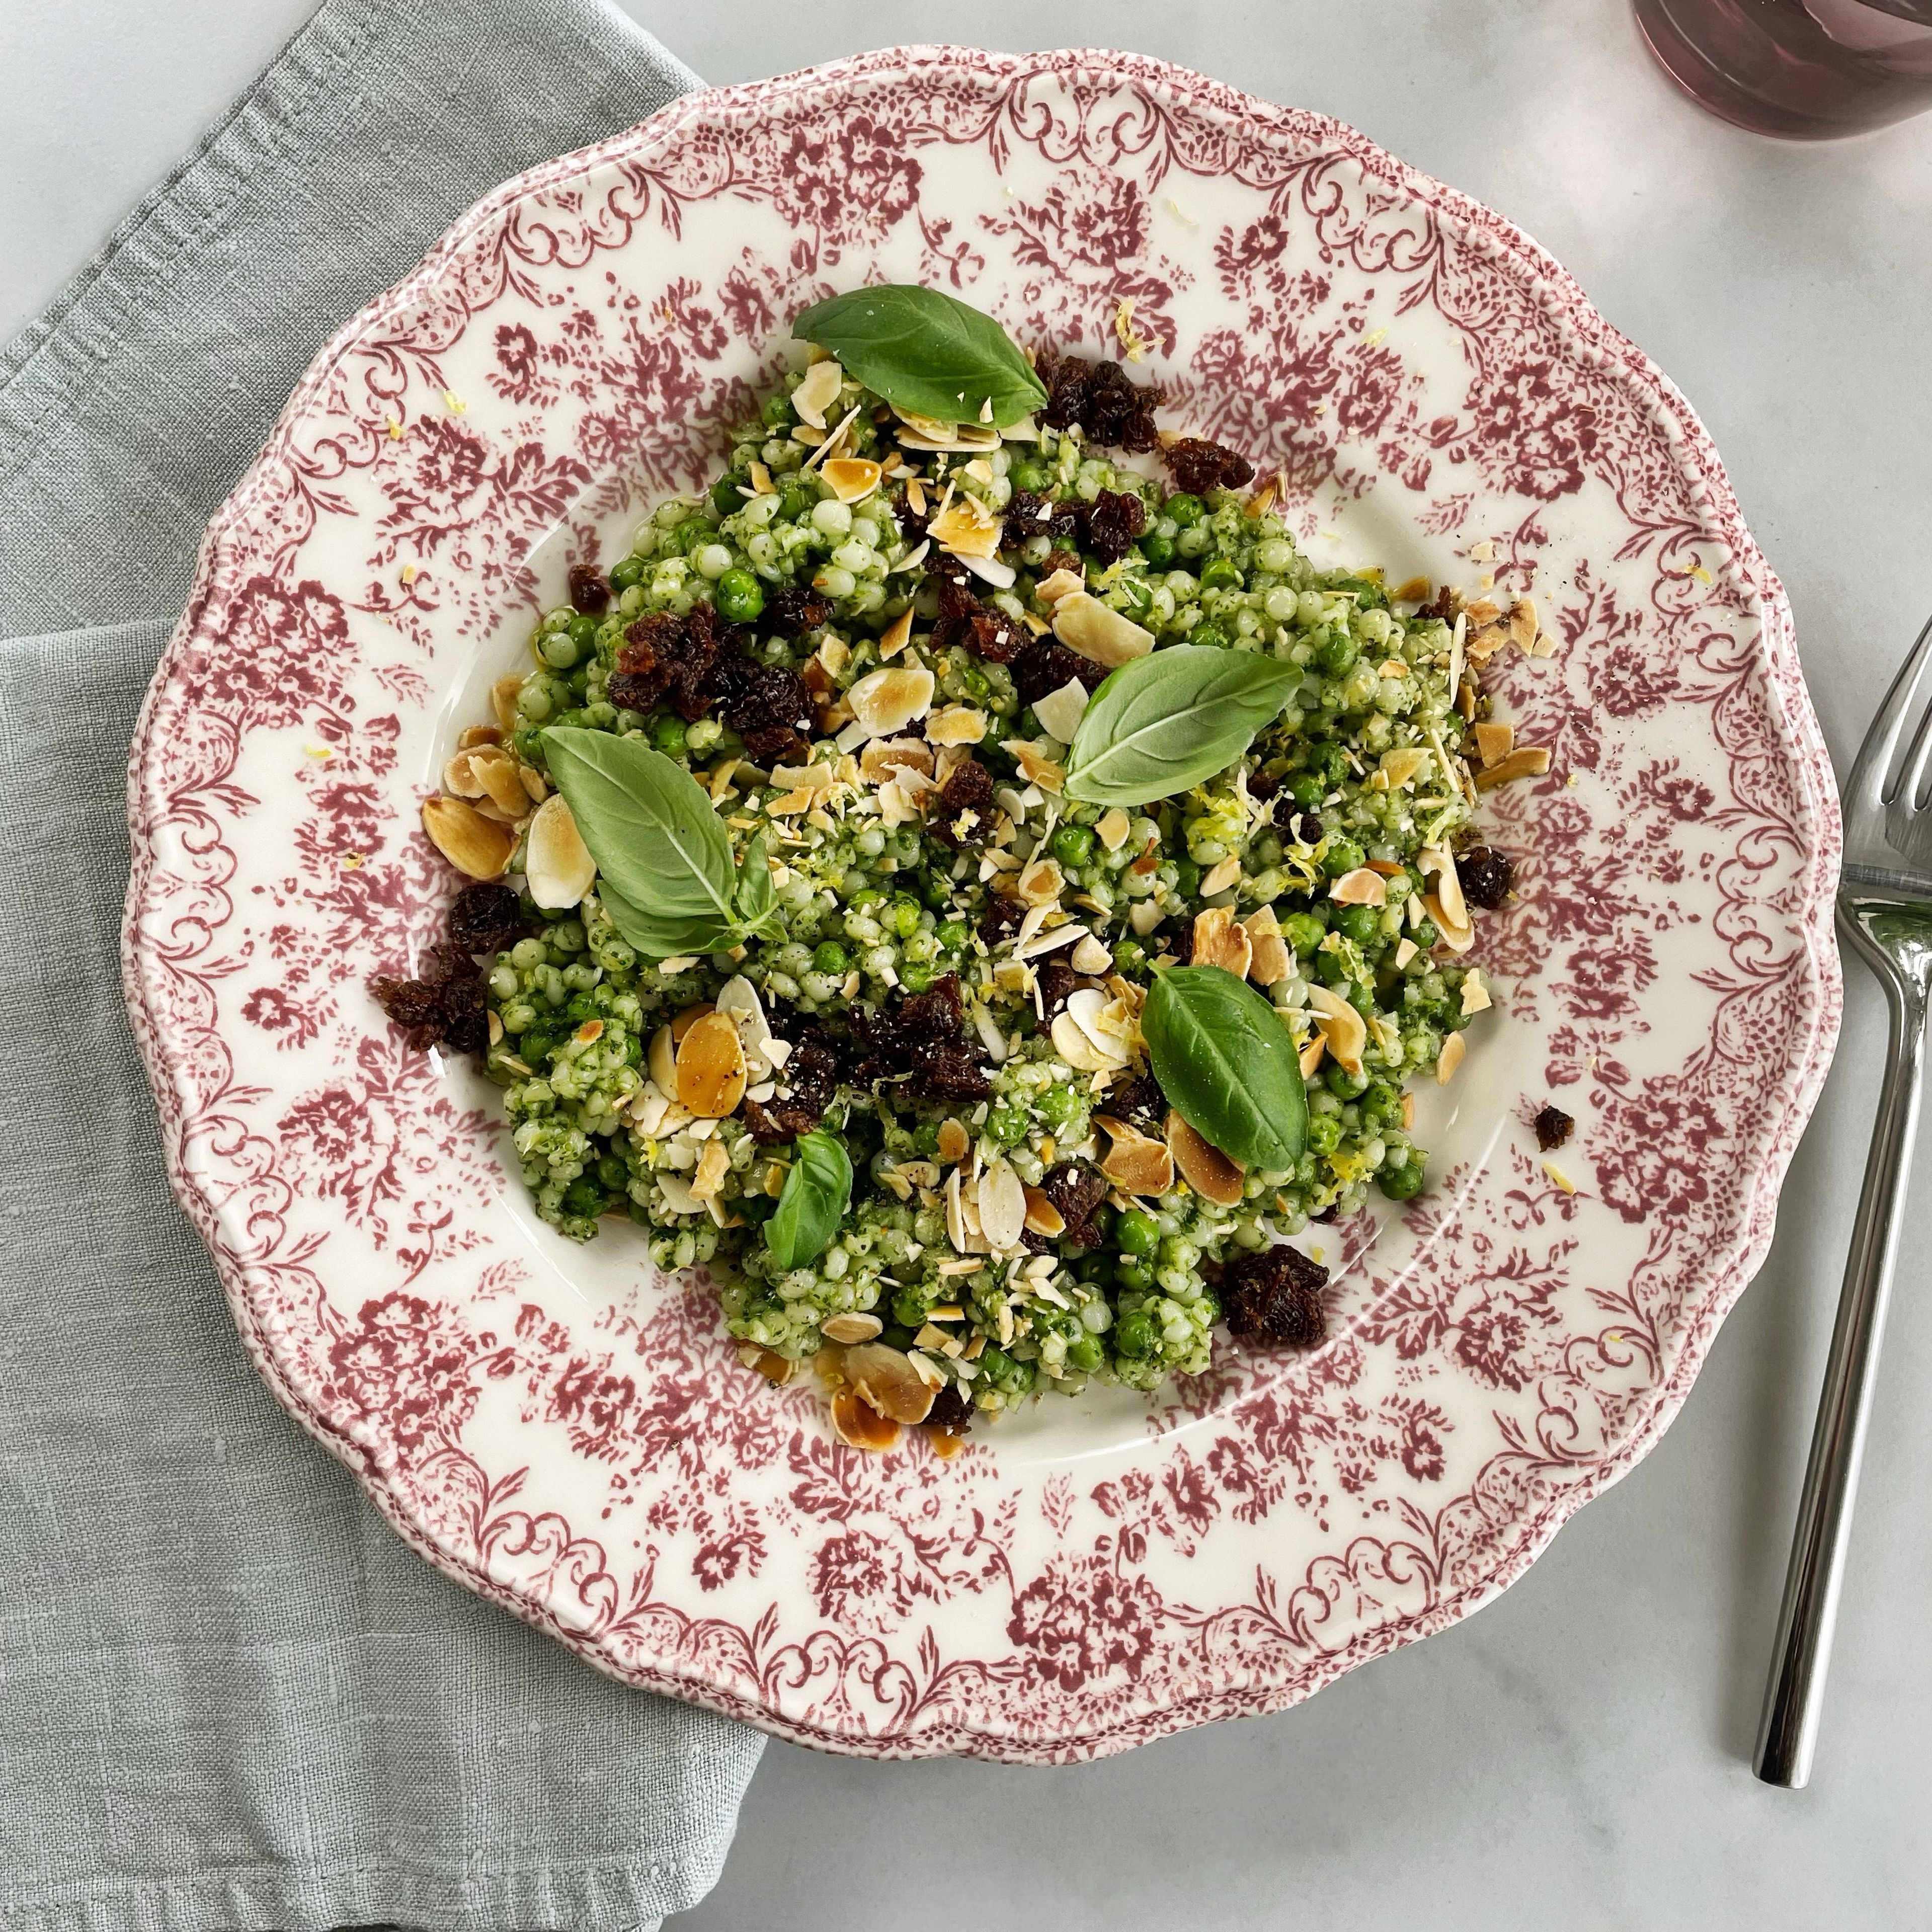 Israeli couscous salad with peas and pesto